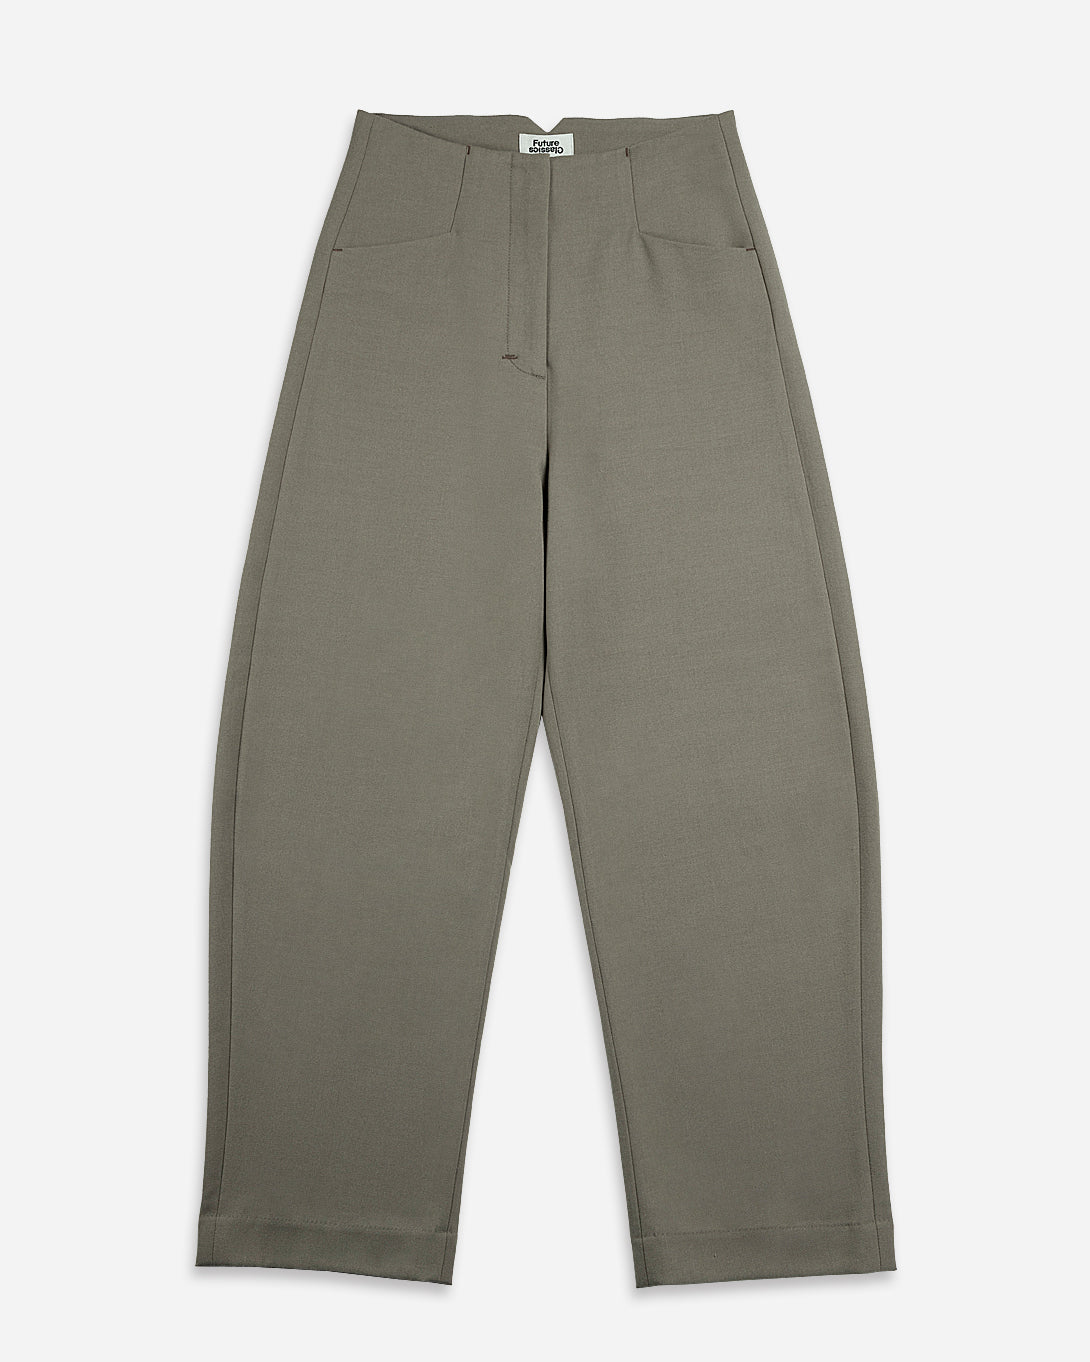 Khaki Seamless Barrel Trousers Womens Relaxed Fit Casual Pant